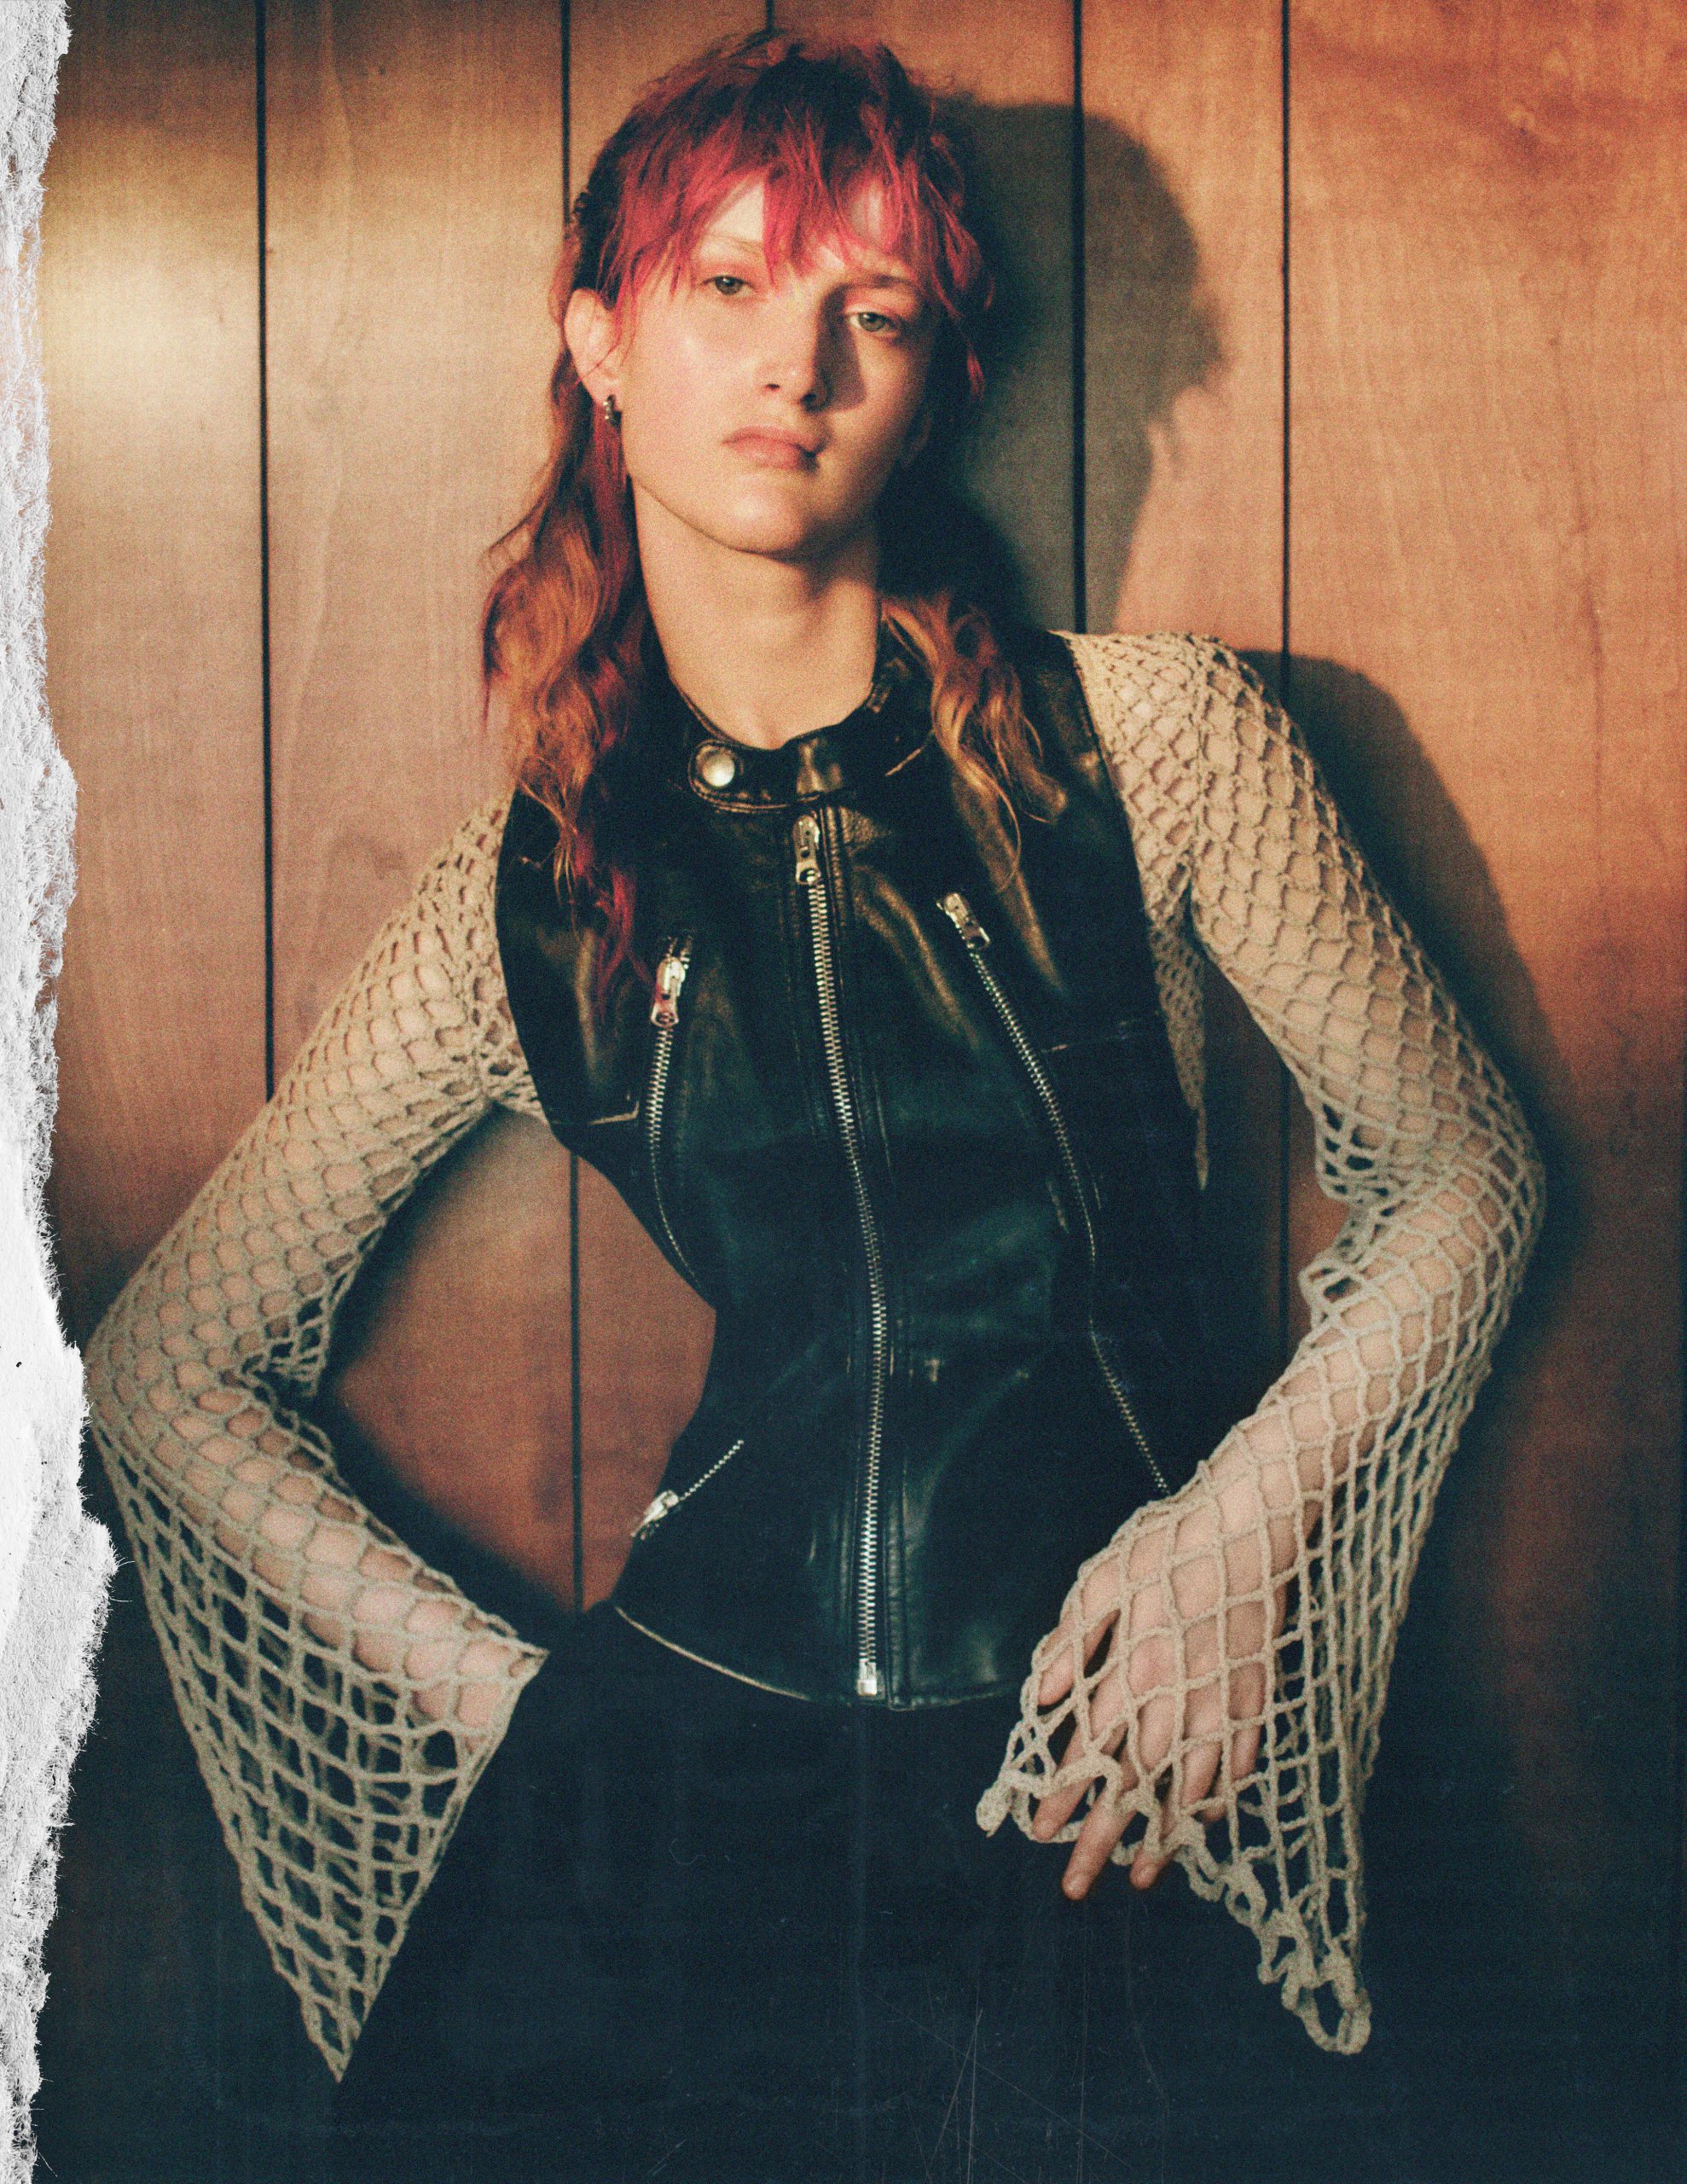 woman wearing a net shirt and leather gilet